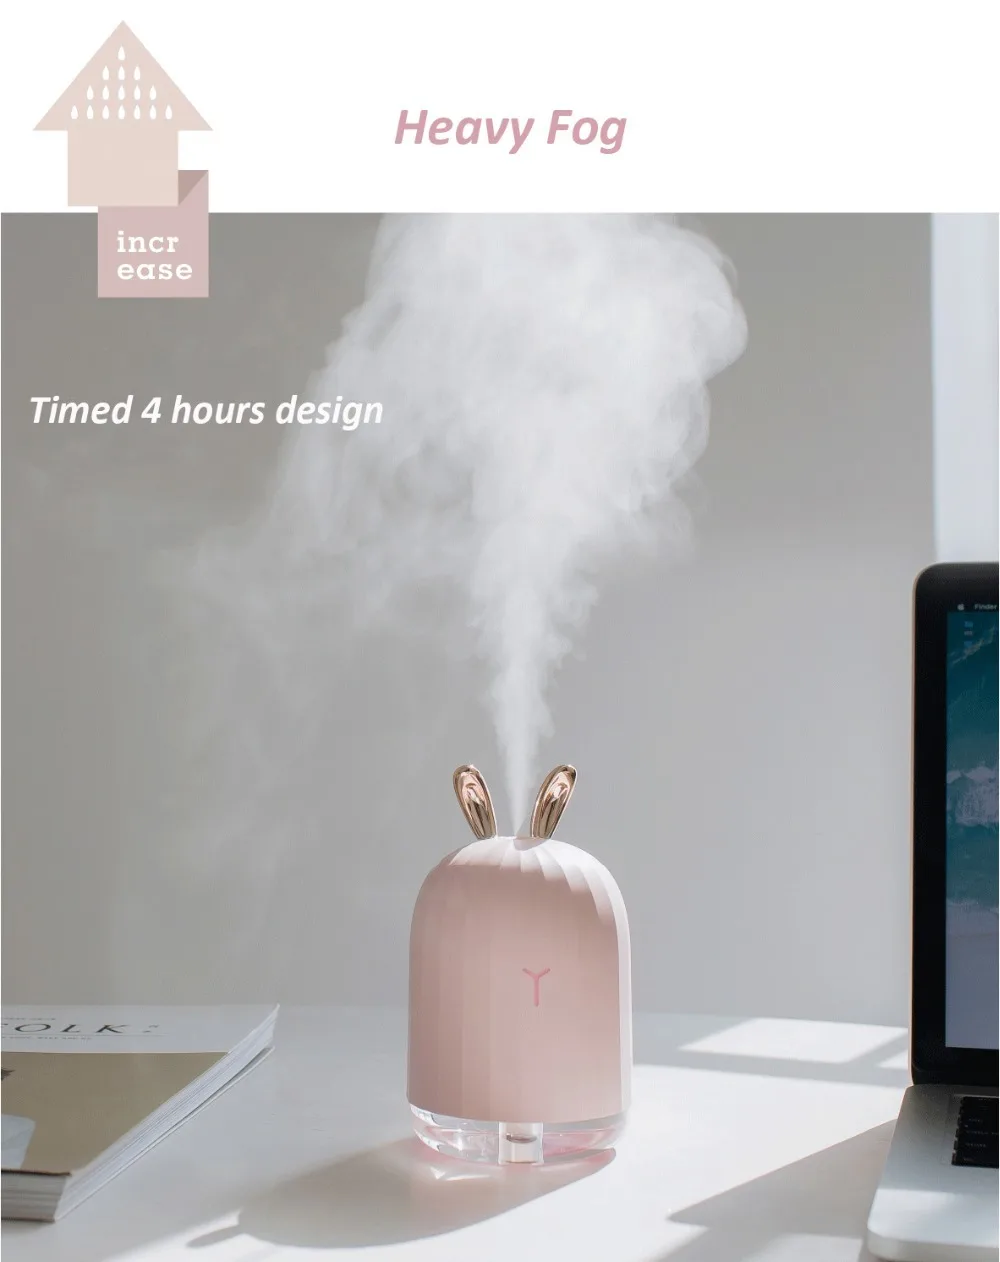 High Quality 220ML Ultrasonic Air Humidifier Aroma Essential Oil Diffuser for Home Car USB Fogger Mist Maker with LED Night Lamp